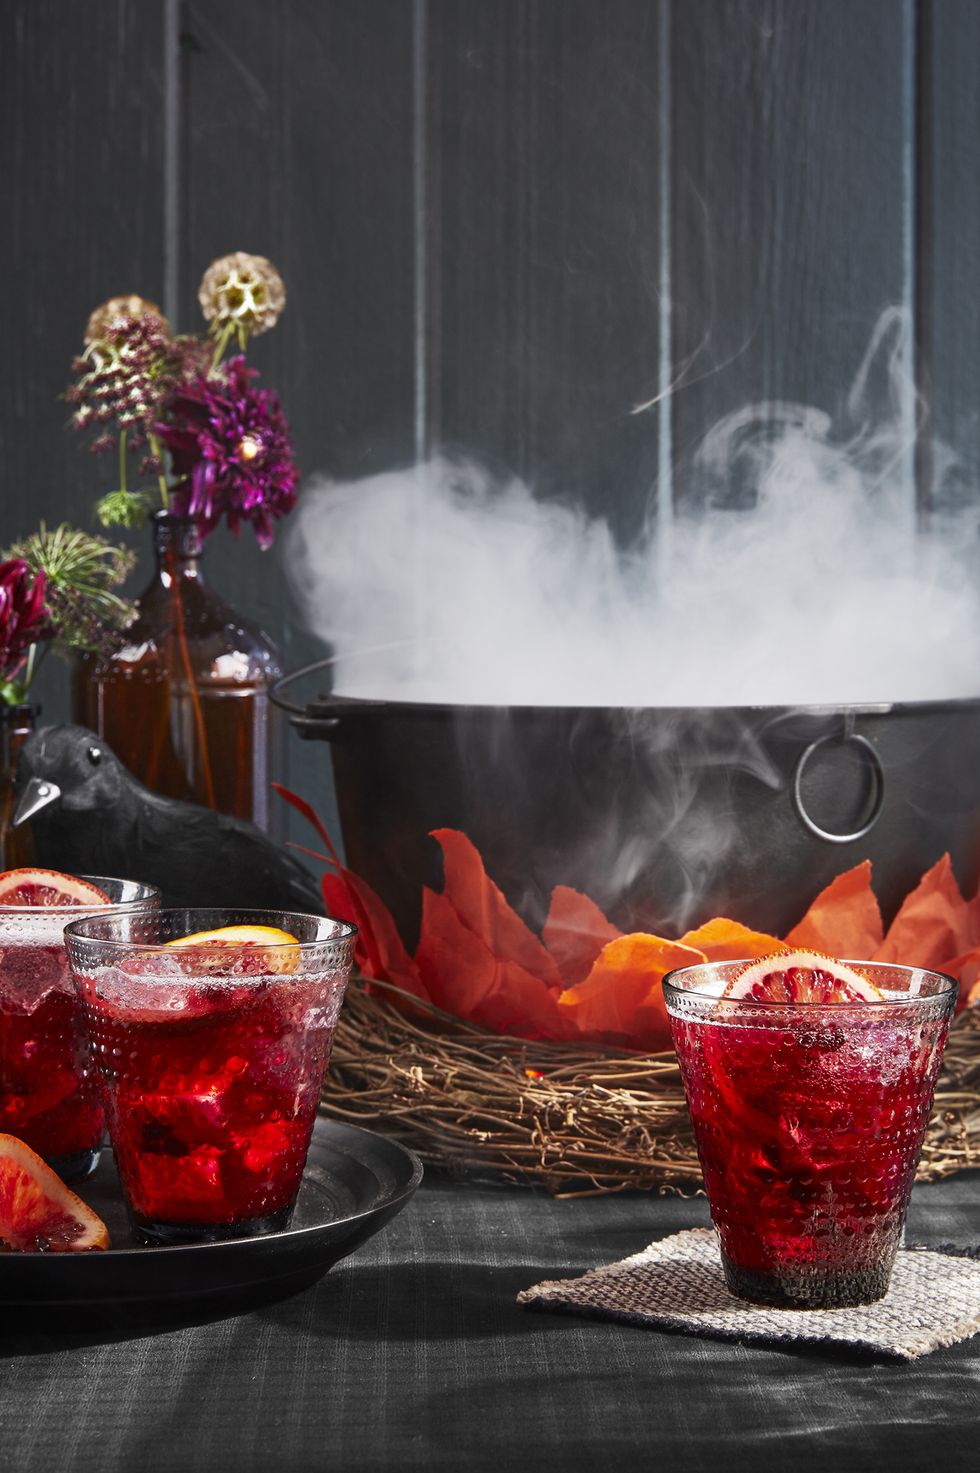 A cauldron containing dry ice that looks like it is bubbling